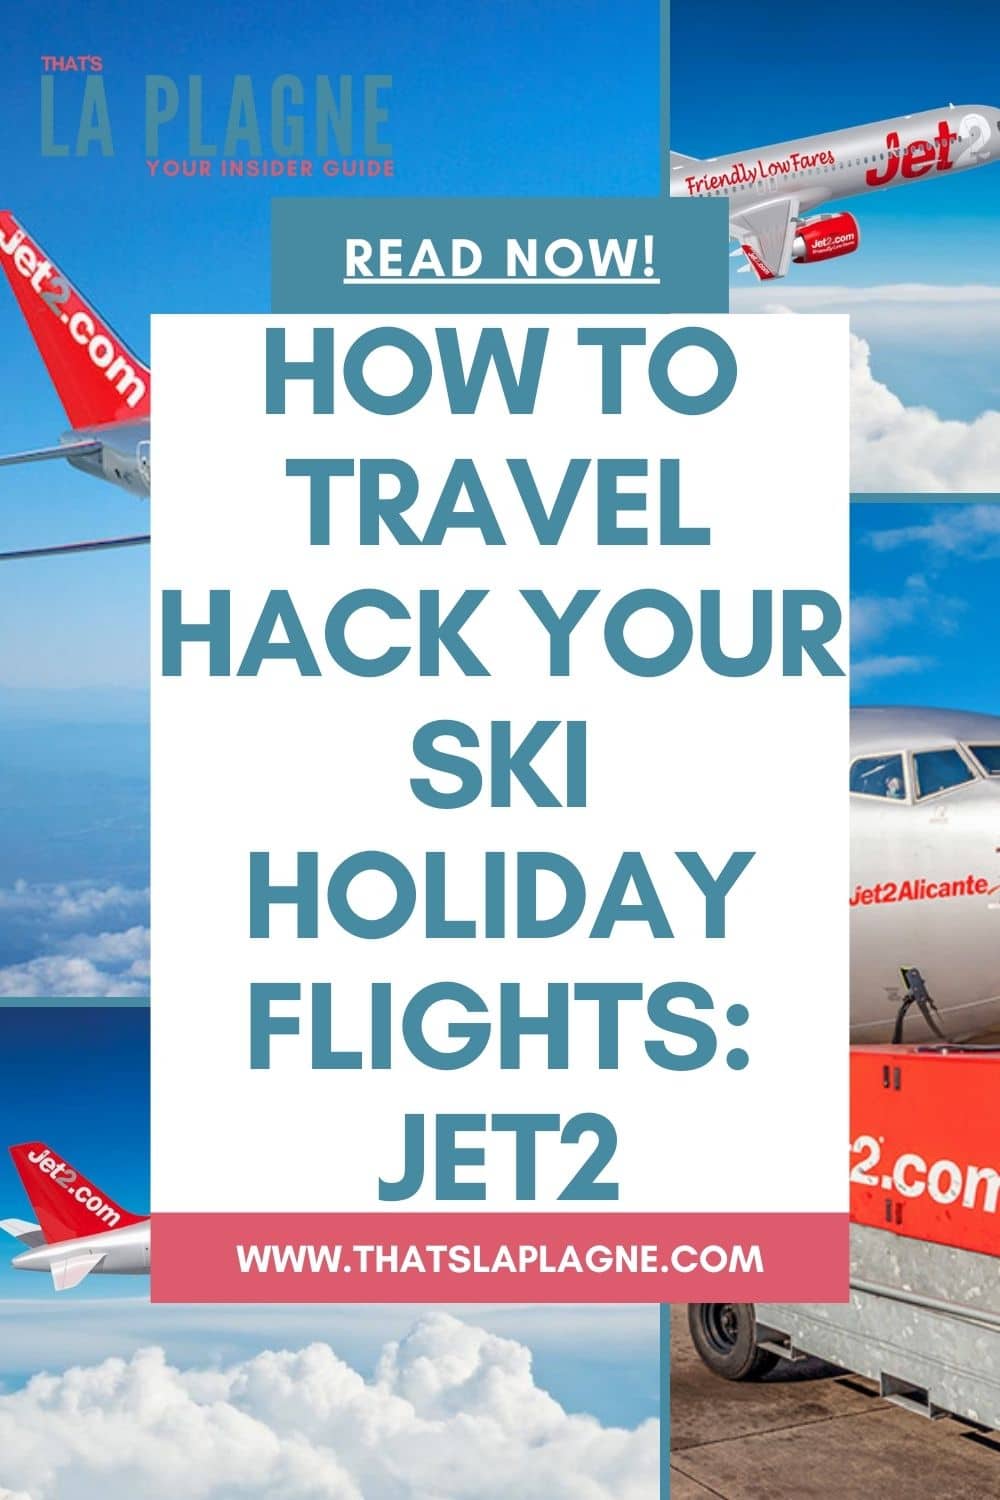 Jet2 flights and ski holidays: A review